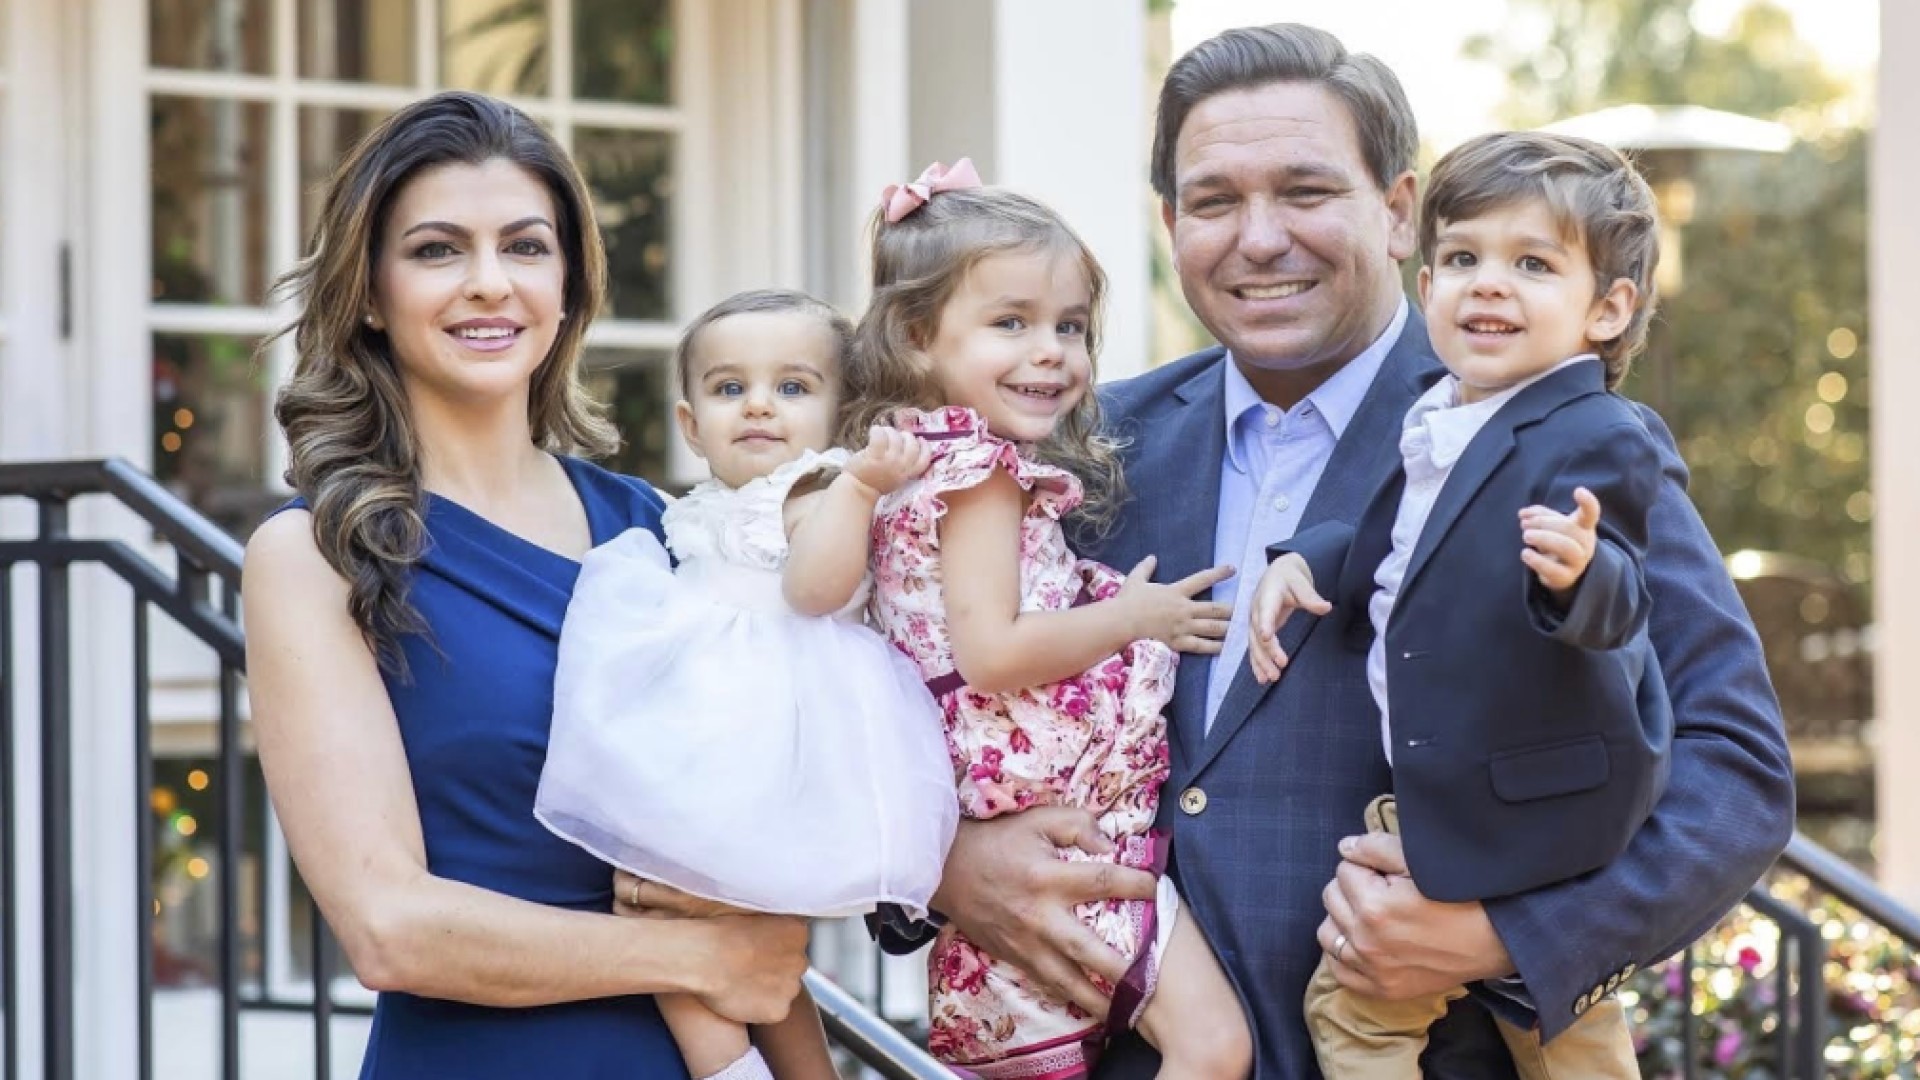 Governor Ron DeSantis calls out woke corporations for wanting kindergarteners to learn transgenderism (and other stories)